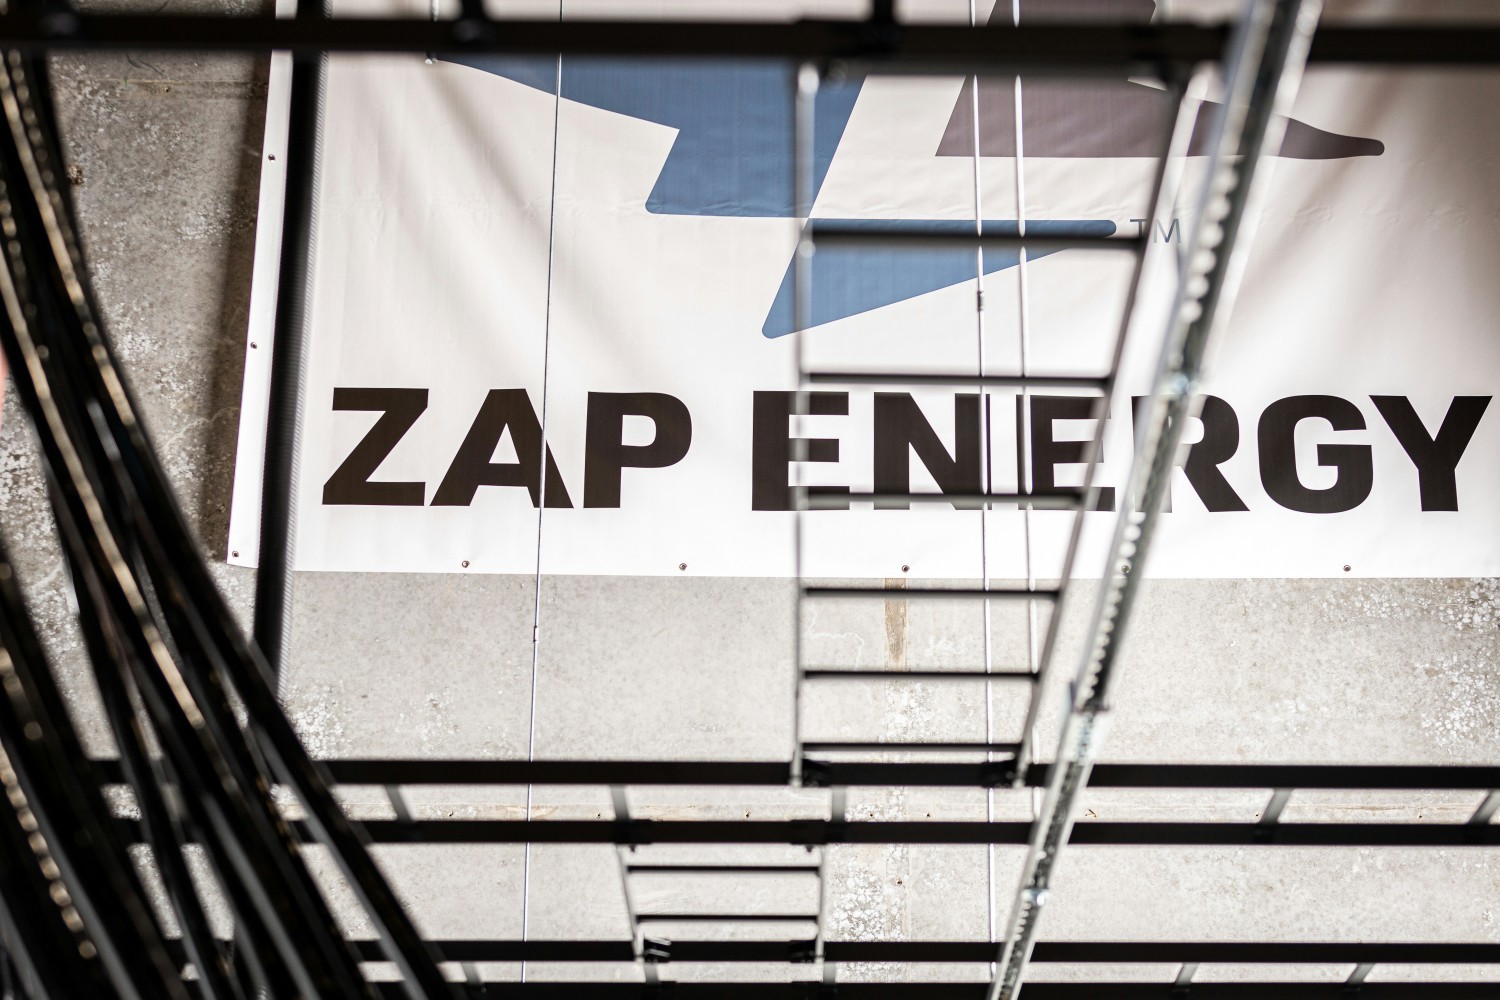 Zap Energy lab and warehouse